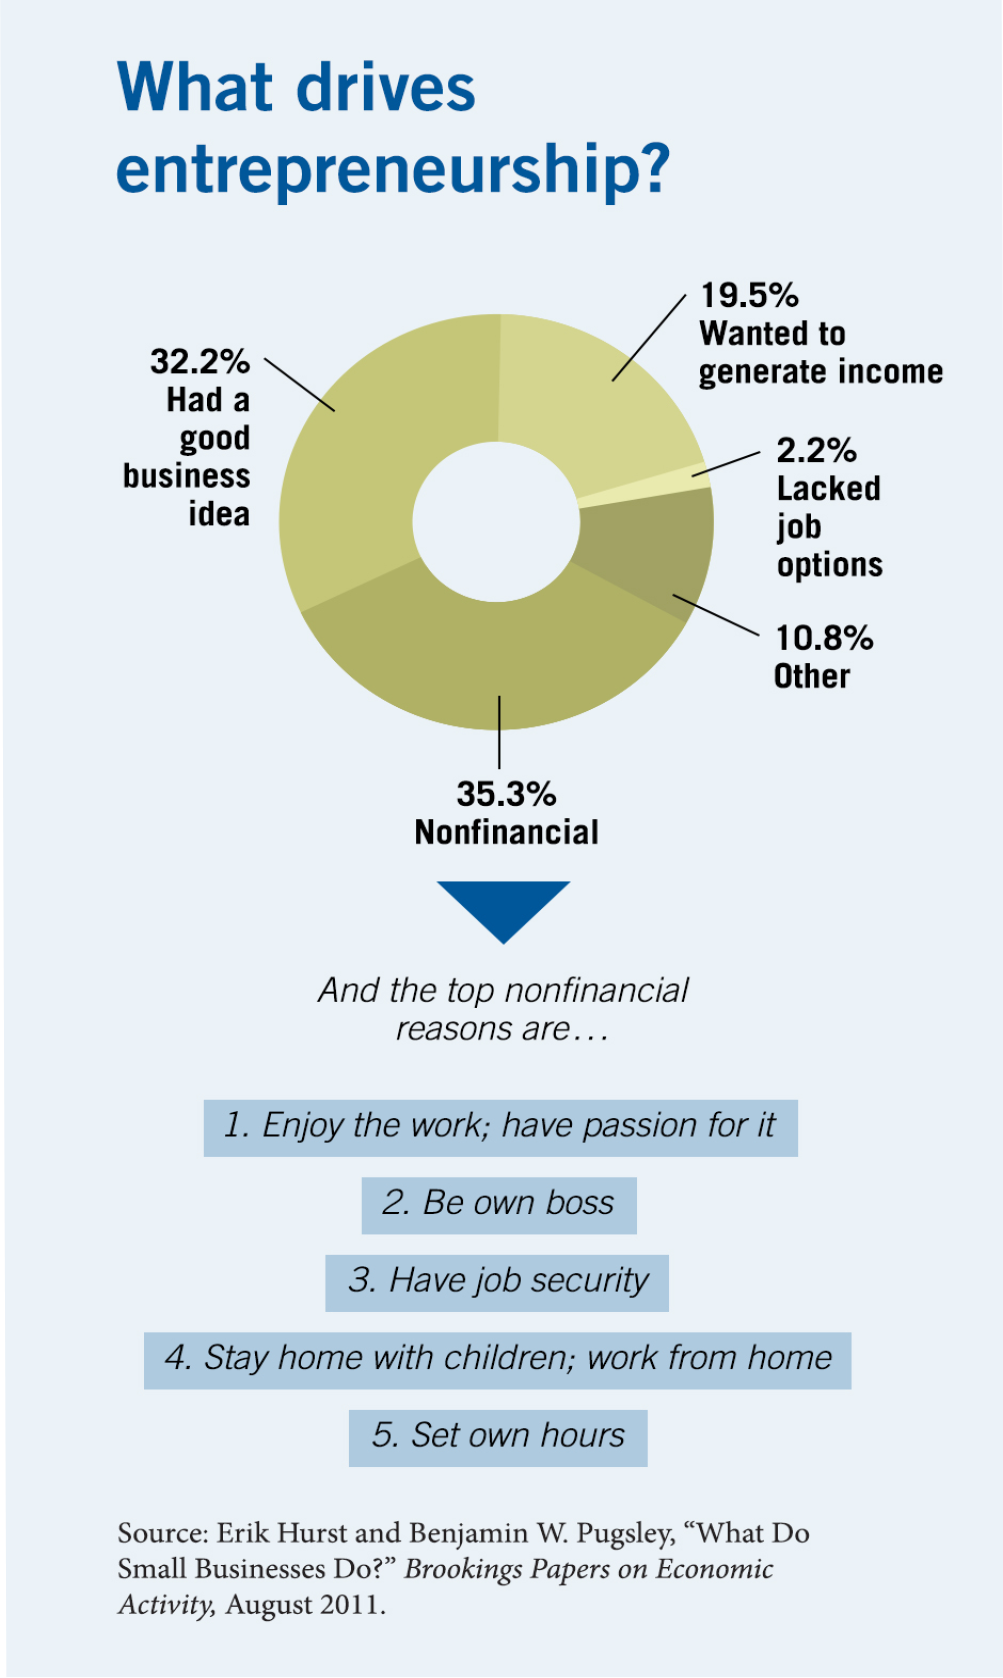 A pie chart plotting entrepreneurs’ top motivations, with thirty-two-point-two percent having a good business idea and nineteen-point-five percent wanting to generate income. Another thirty-five-point three cited nonfinancial reasons, including enjoyment of the work, being their own boss, job security, working form home, and setting their own hours.